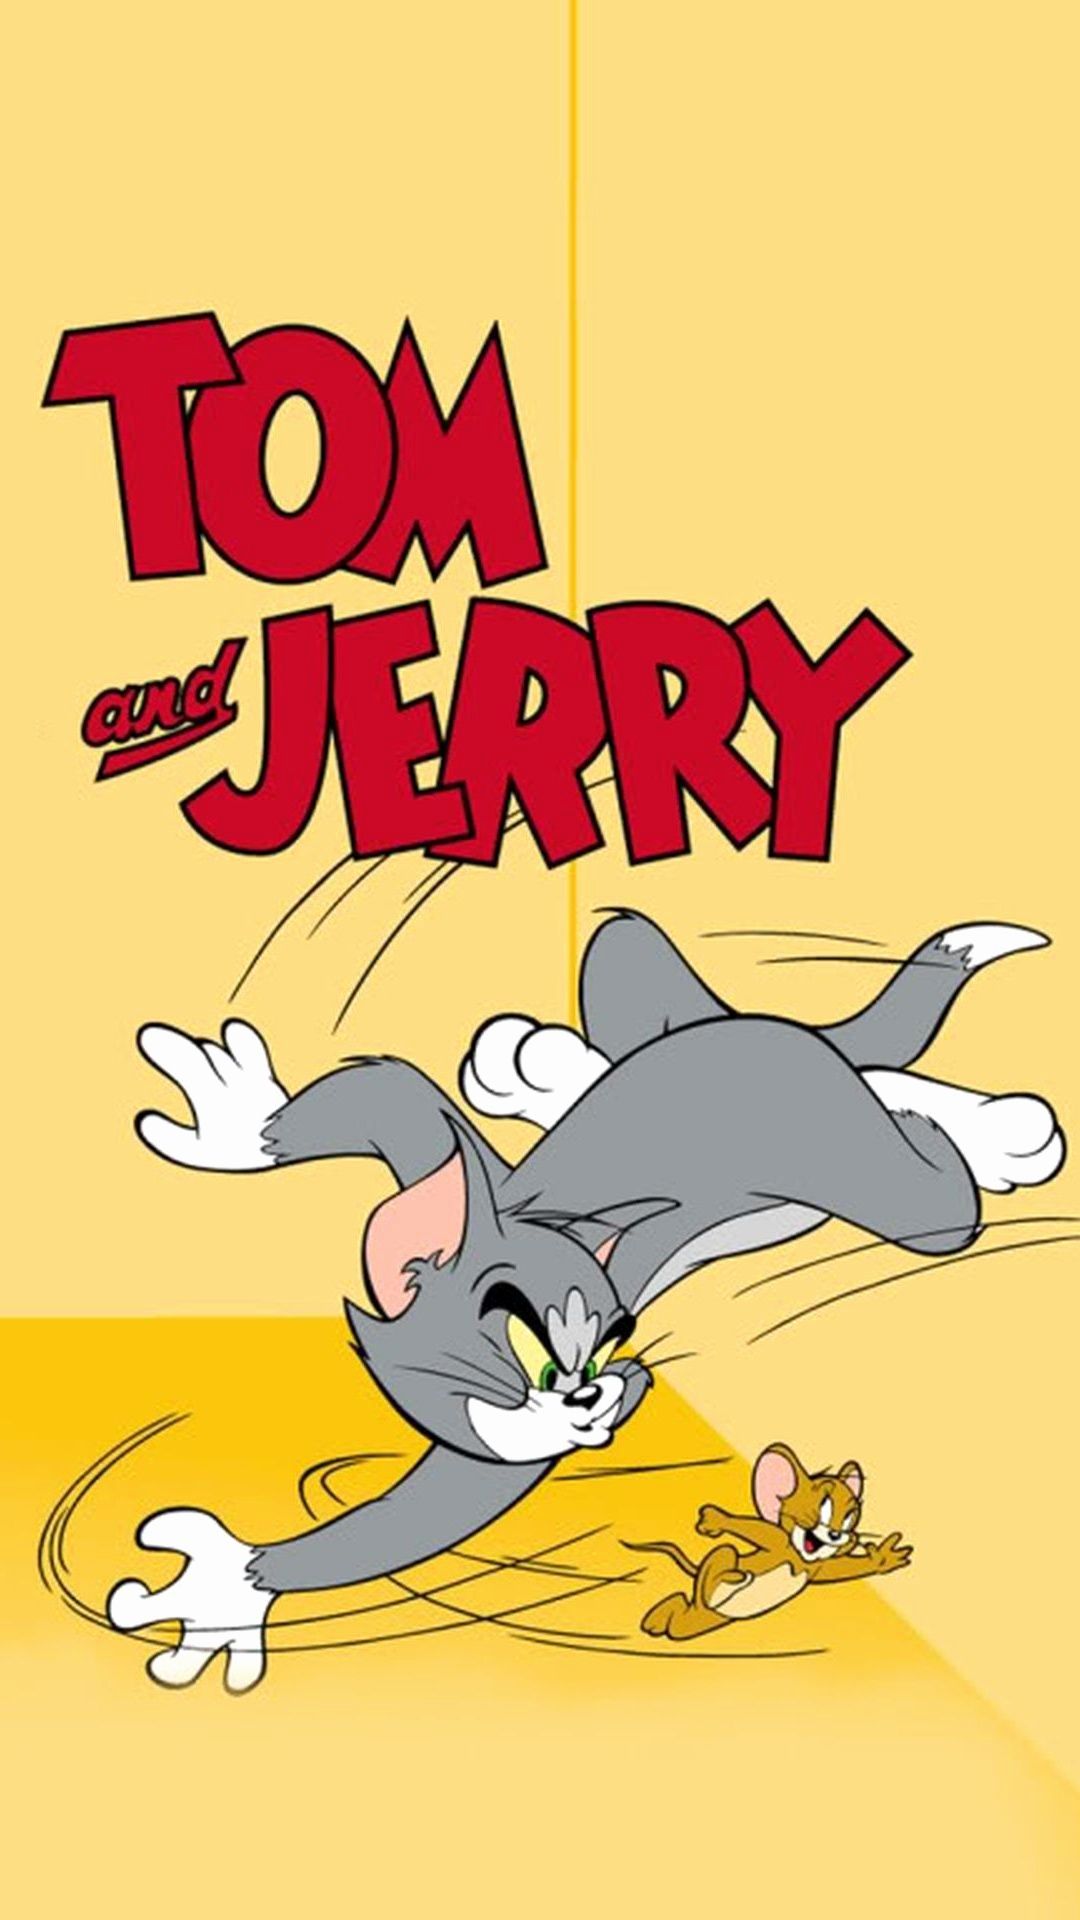 90s Wallpaper New tom and Jerry iPhone Wallpaper Childhood Memories 90s Cartoon Mobile9 Ideas of The Hudson